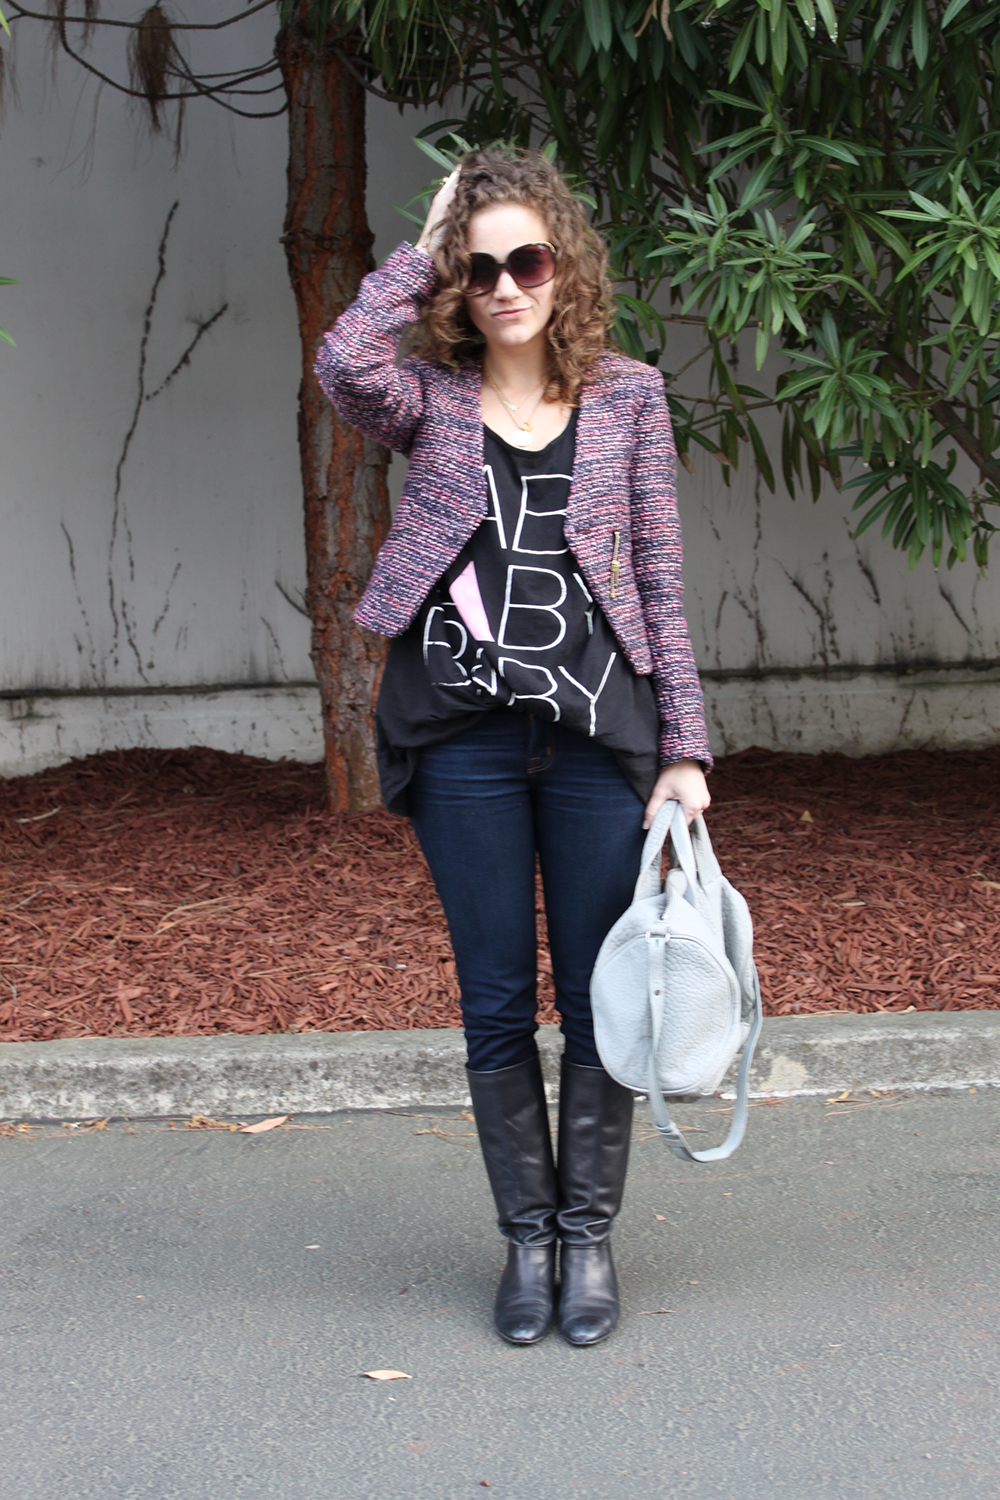 kate franco of undeniable style in casual tweed jacket and sincerely jules tee